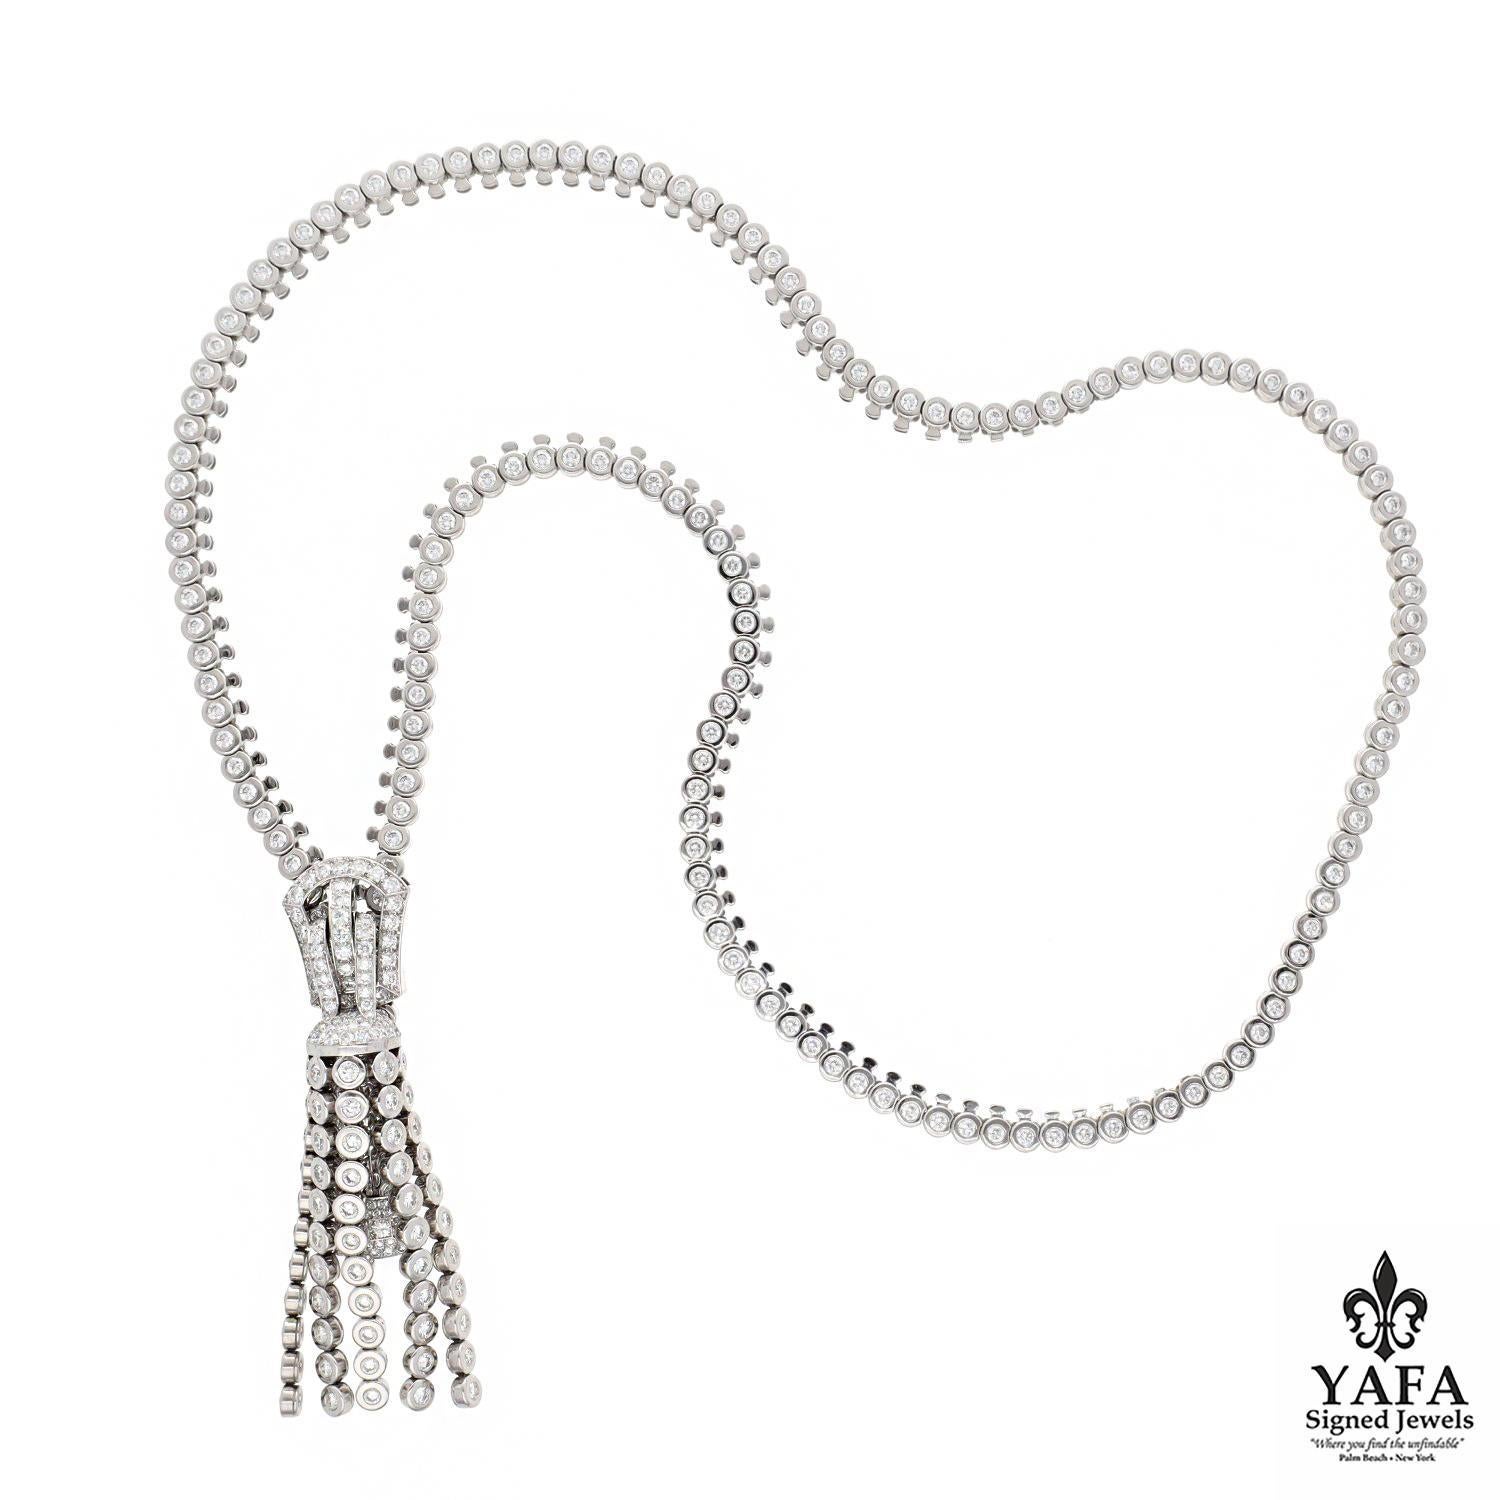 Van Cleef & Arpels 18K White Gold and Diamond Extra Long Adjustable Length ZIP Necklace. It's fascinating how we can discover beauty in the simplest of things when we take the time to look at them from a different angle or with fresh eyes. A